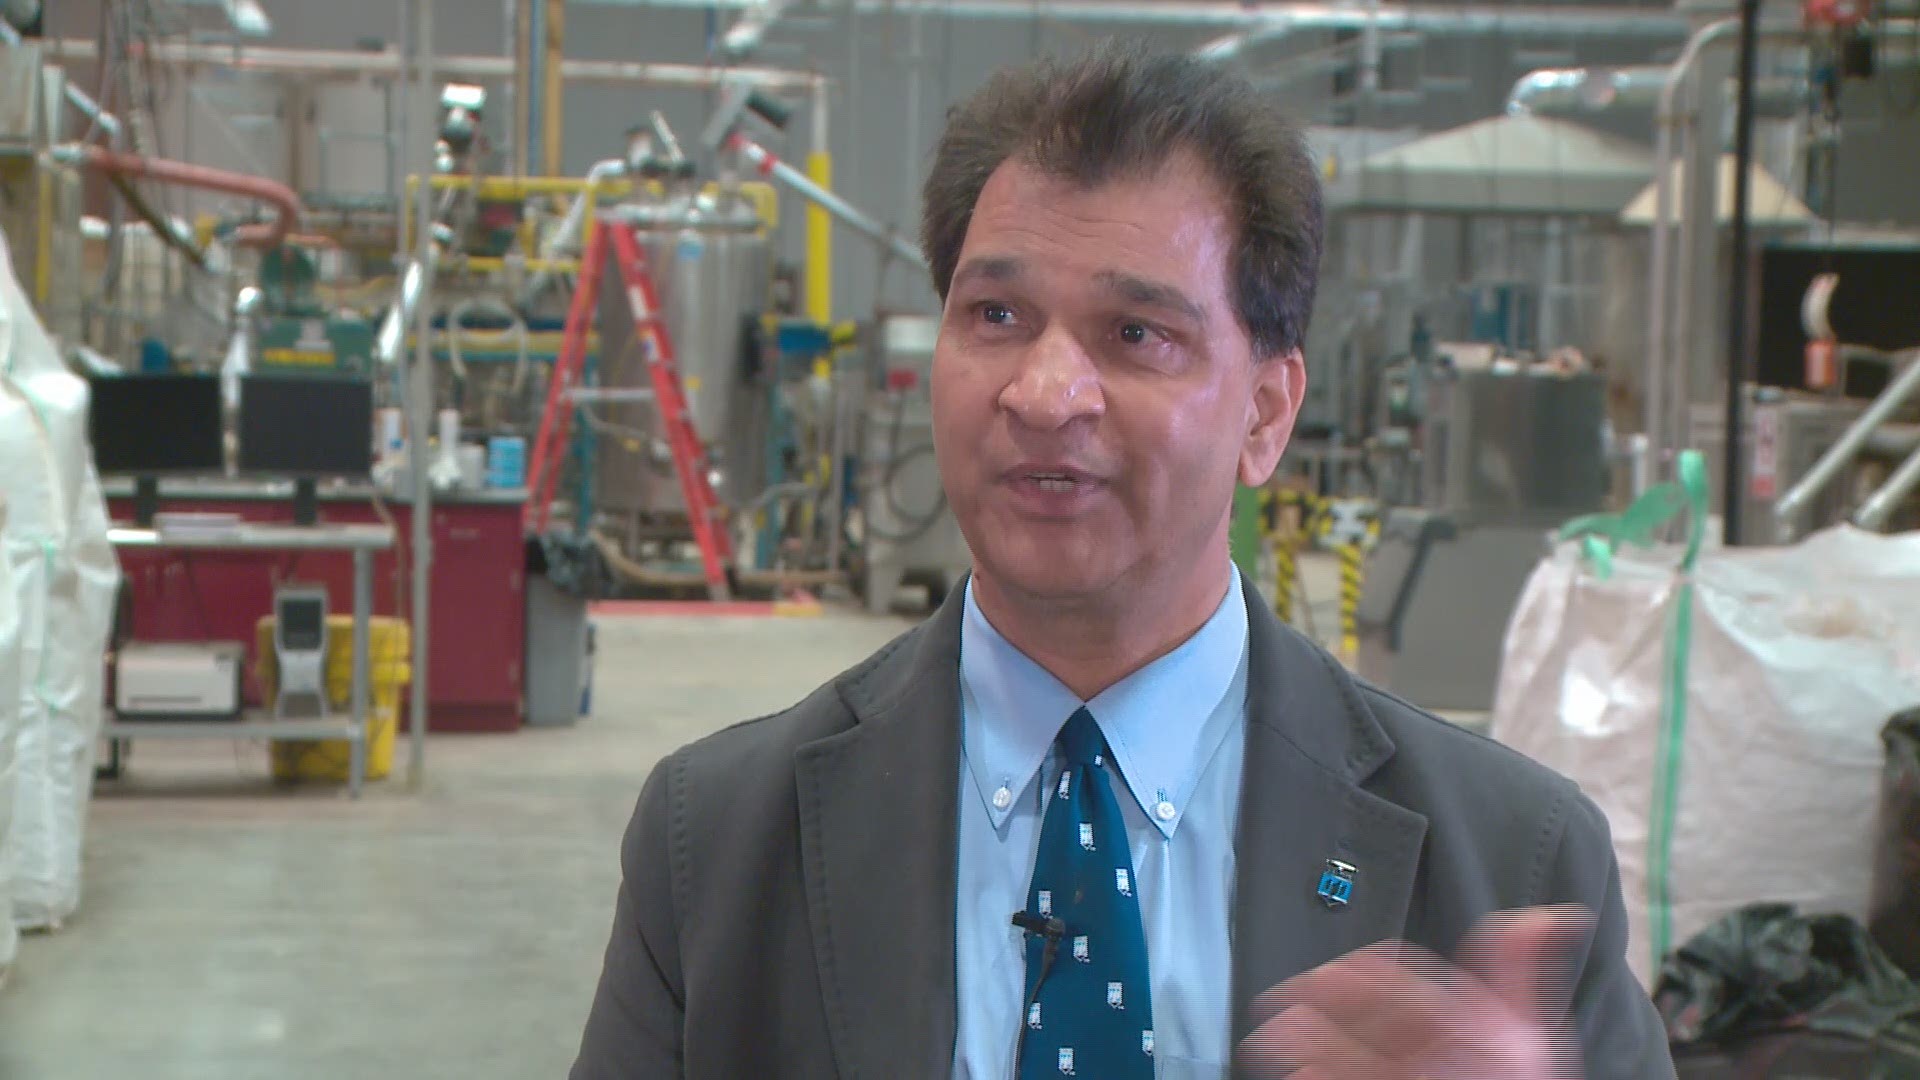 Hemant Pendse, director of the Forest Bioproducts Research Institute, explains how students at UMaine students discovered a new process for creating crude oil from wood biomass. It all happened by chance.